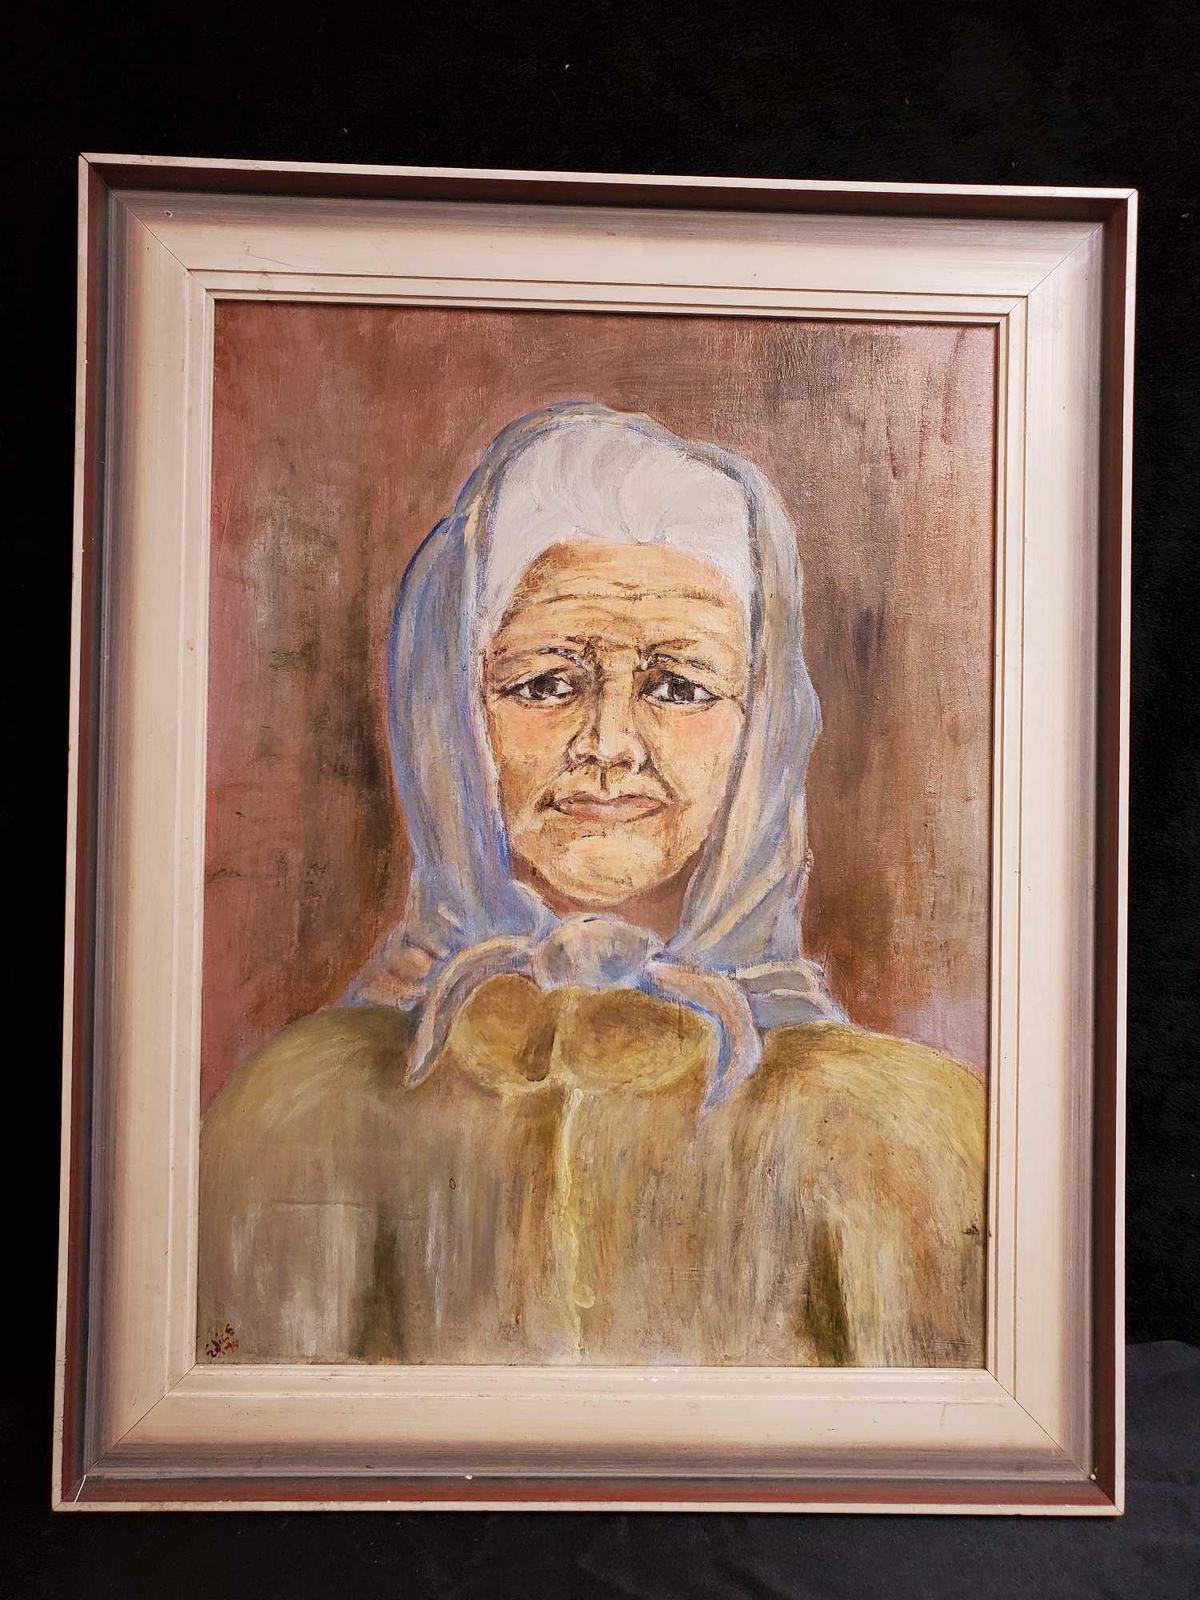 LARGE FRAMED PORTRAIT OF OLD WOMAN IN SHAW, SIGNED BY ARTIST 1974, PASTEL